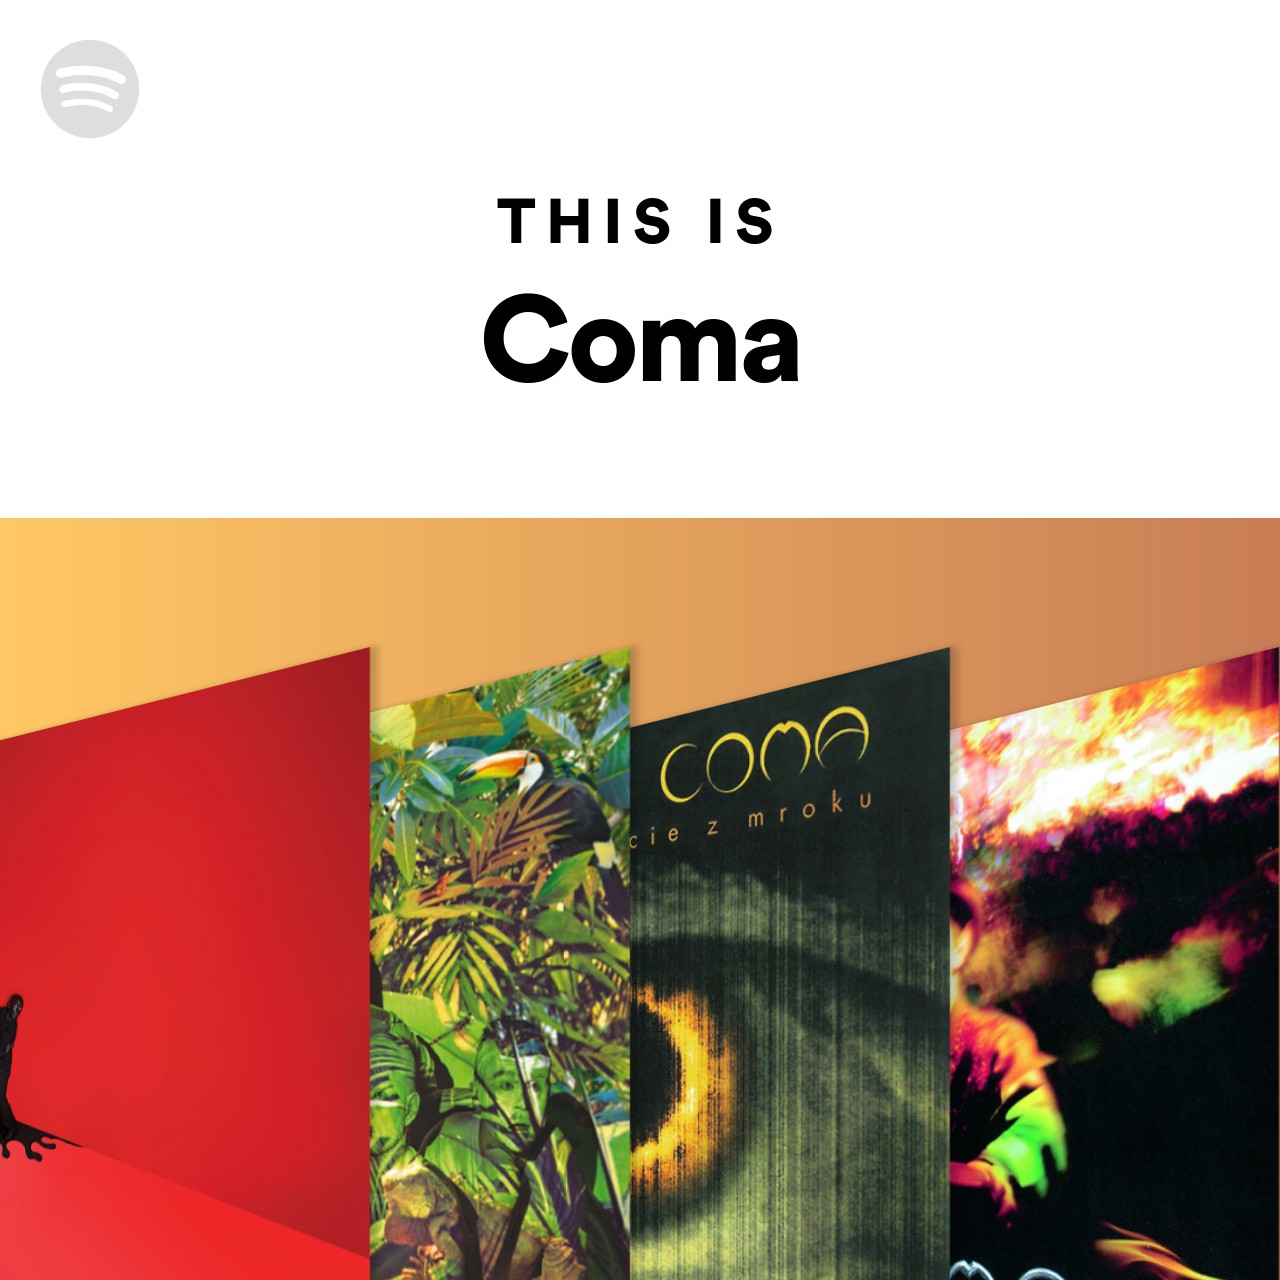 This Is Coma